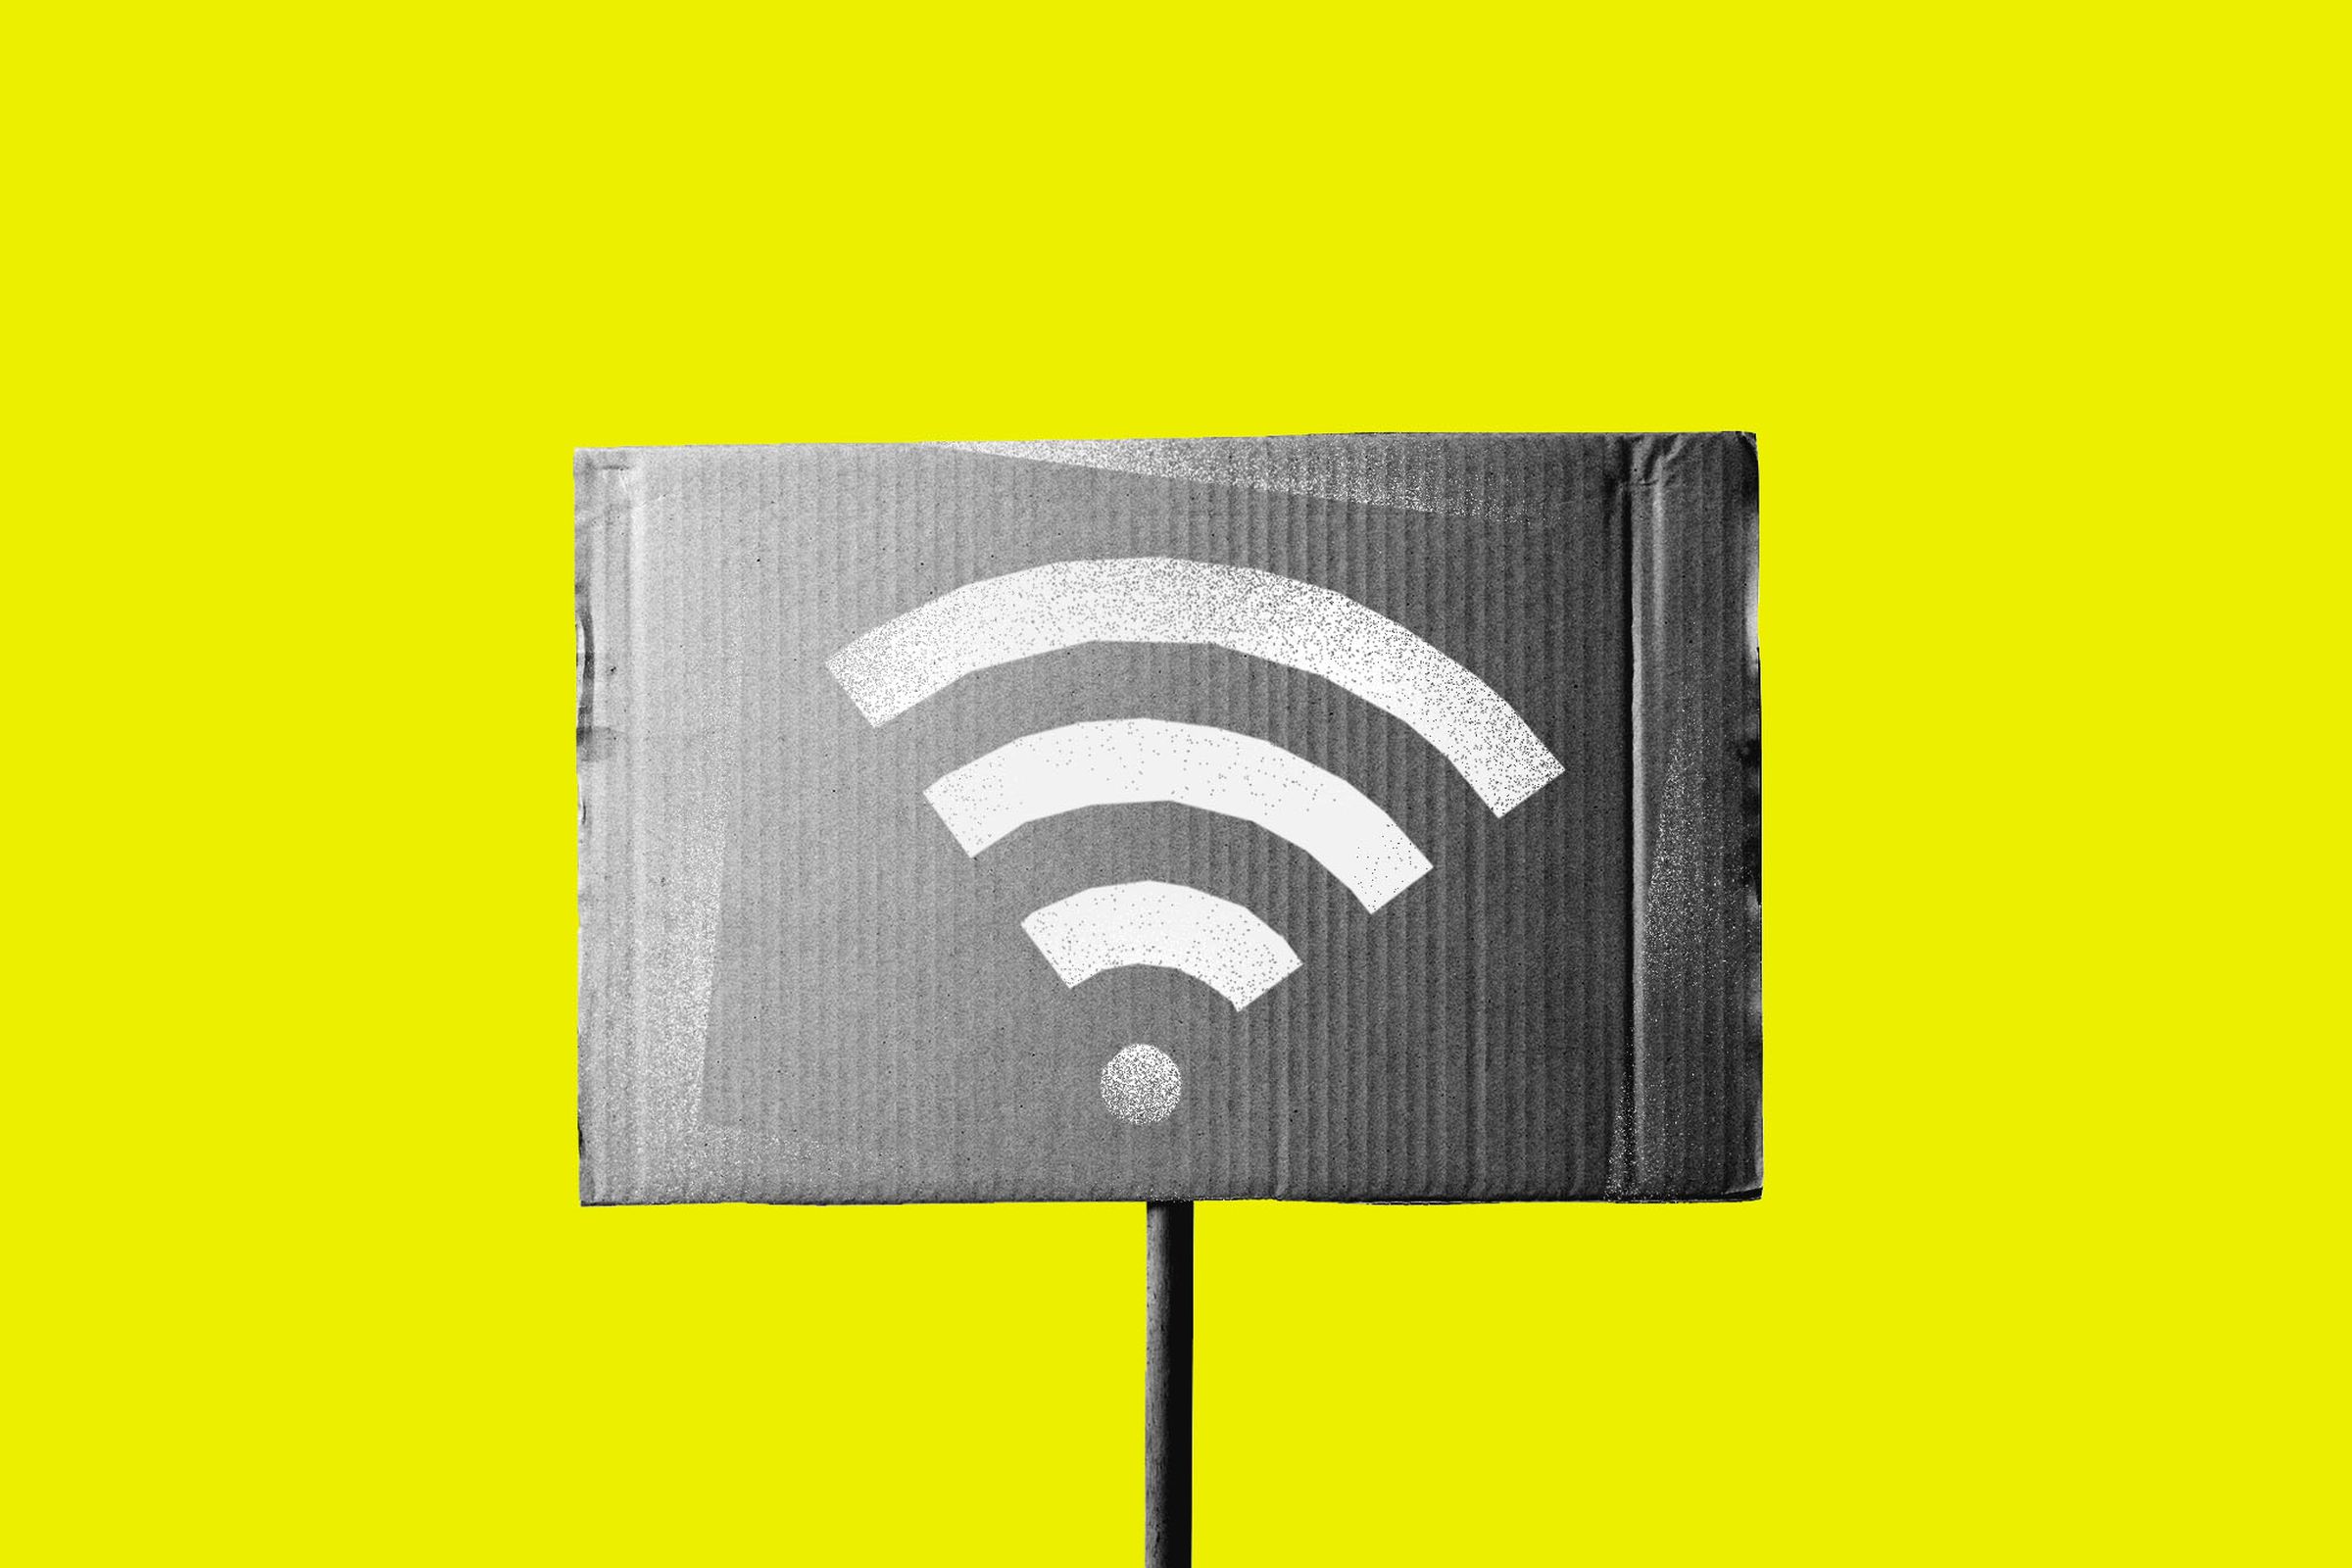 Photo illustration of a protest sign with a Wi-Fi symbol.